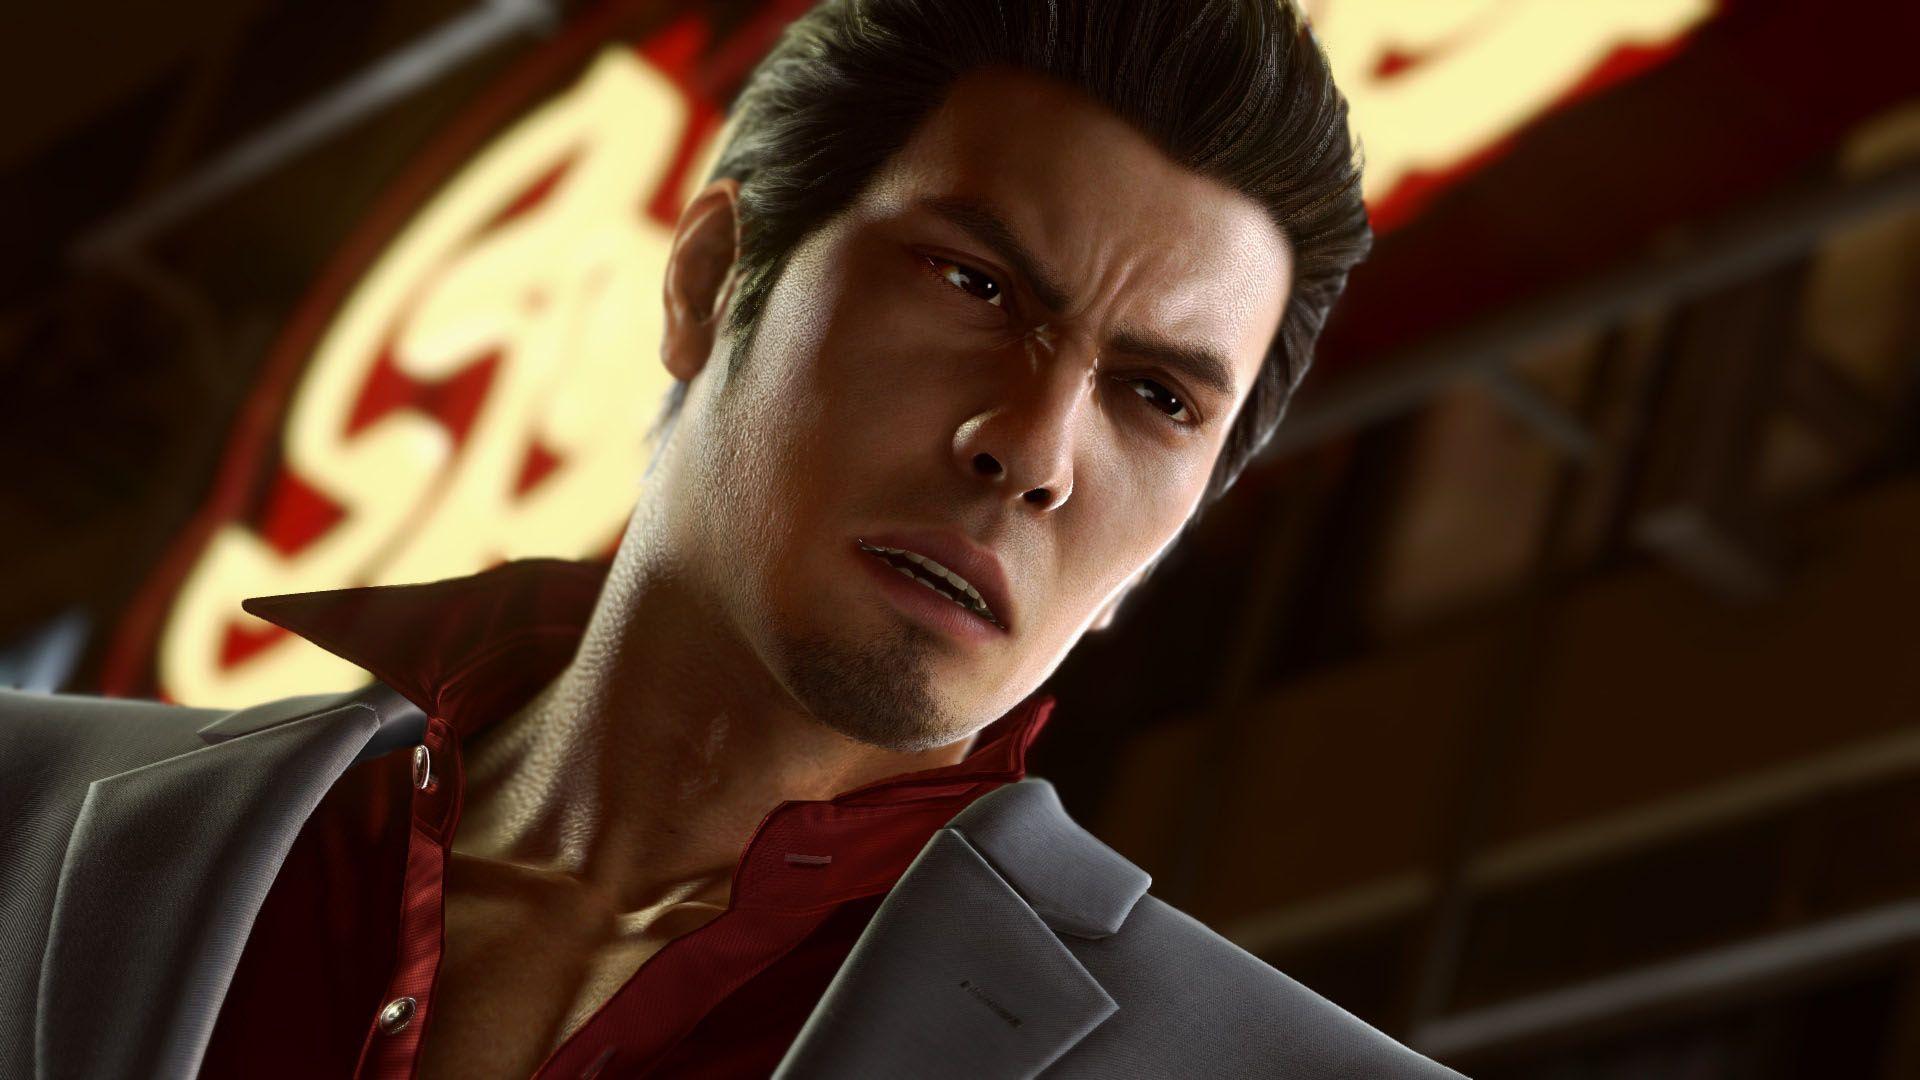 Yakuza Kiwami 2's Western Release Announced; Coming to PS4 in August